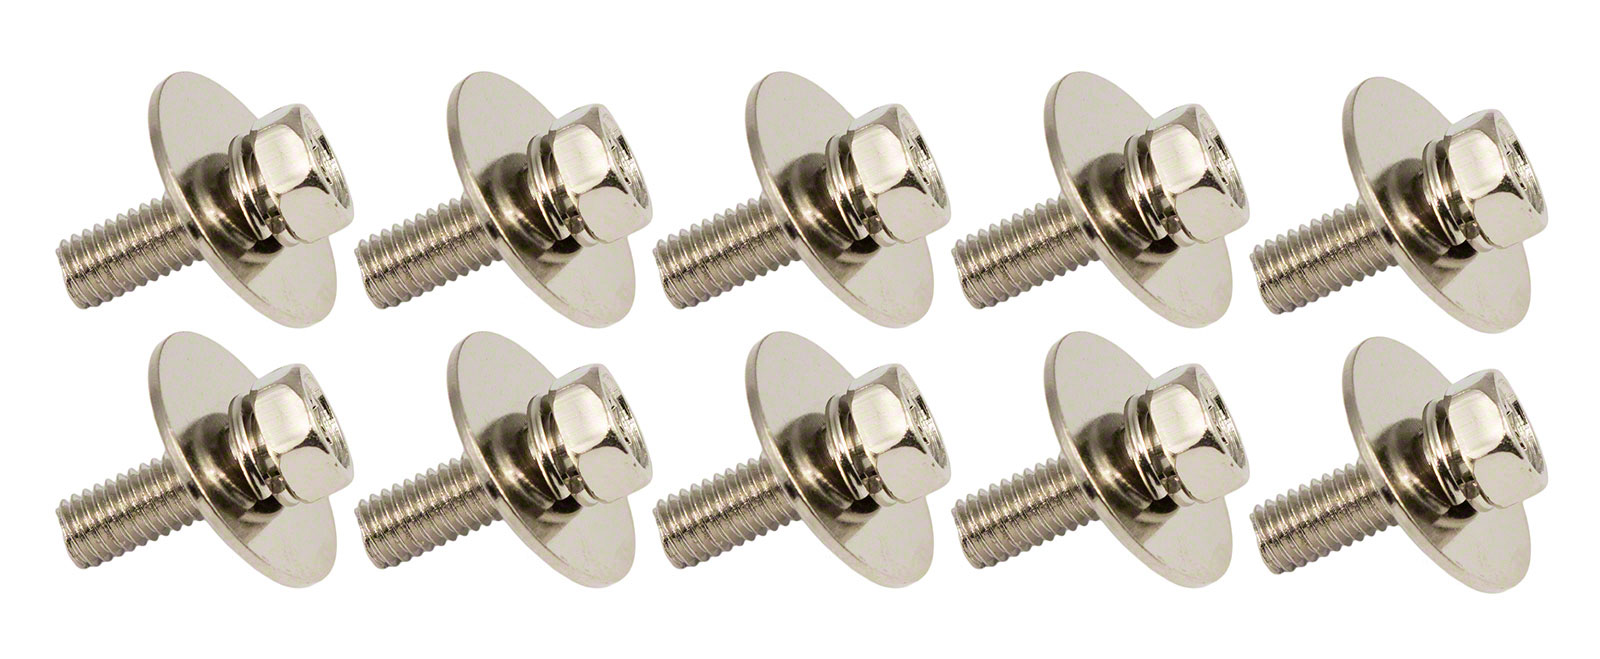 SPAREDRUM WSC5-15 - M5 15MM - MOUNTING SCREW FOR WOODEN SHELL (X10)